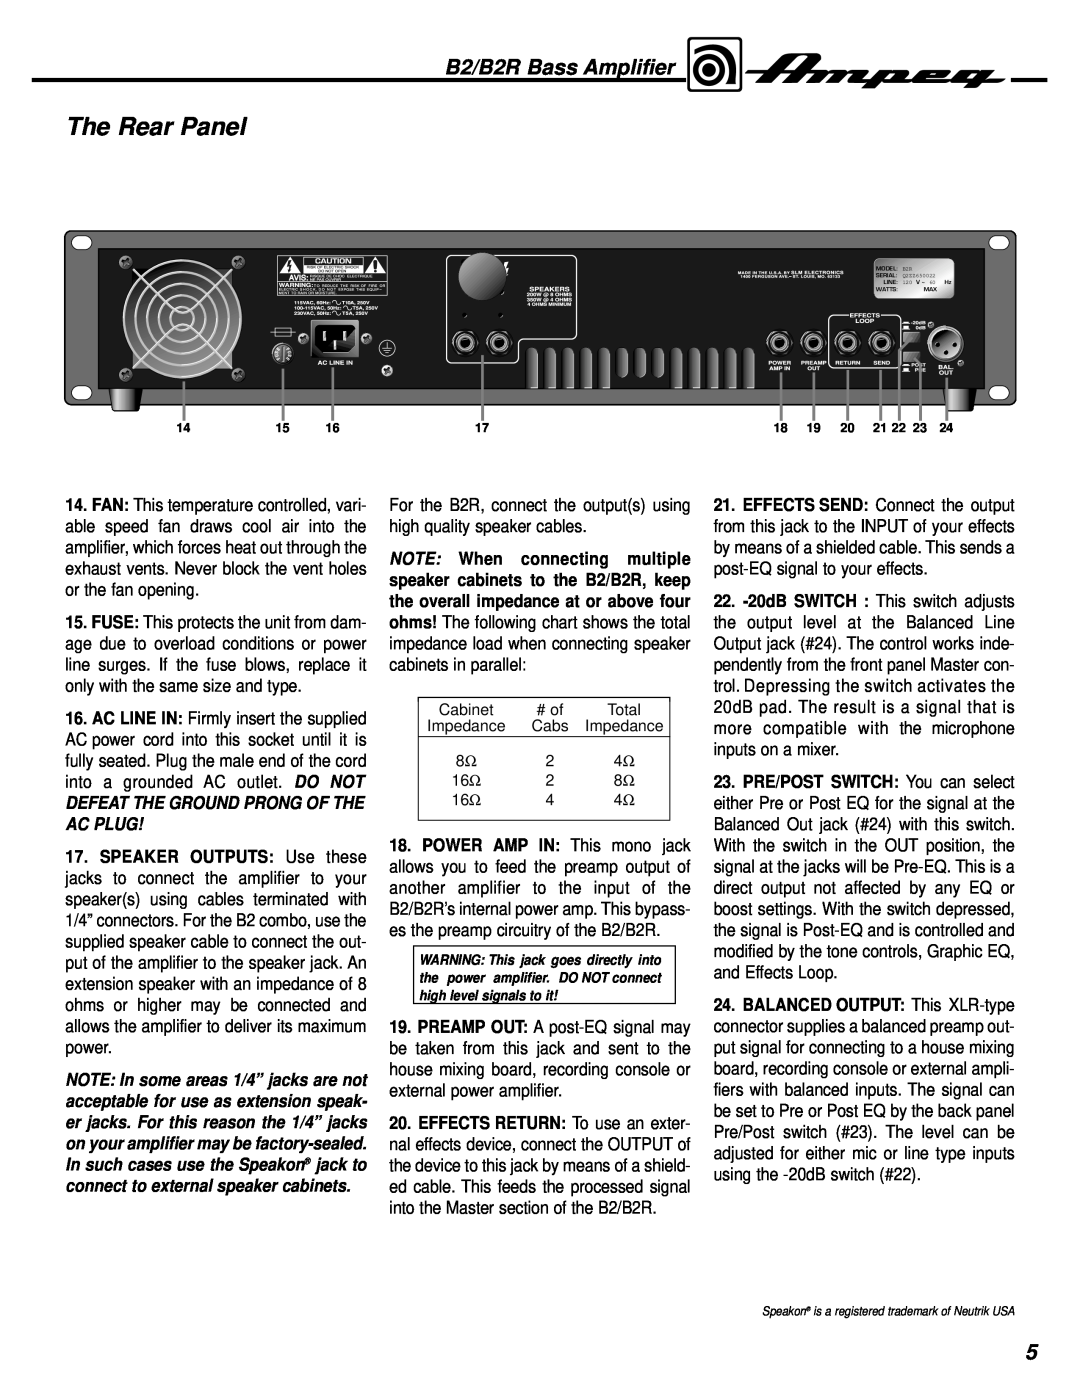 Ampeg manual The Rear Panel, Defeat The Ground Prong Of The Ac Plug, B2/B2R Bass Amplifier 